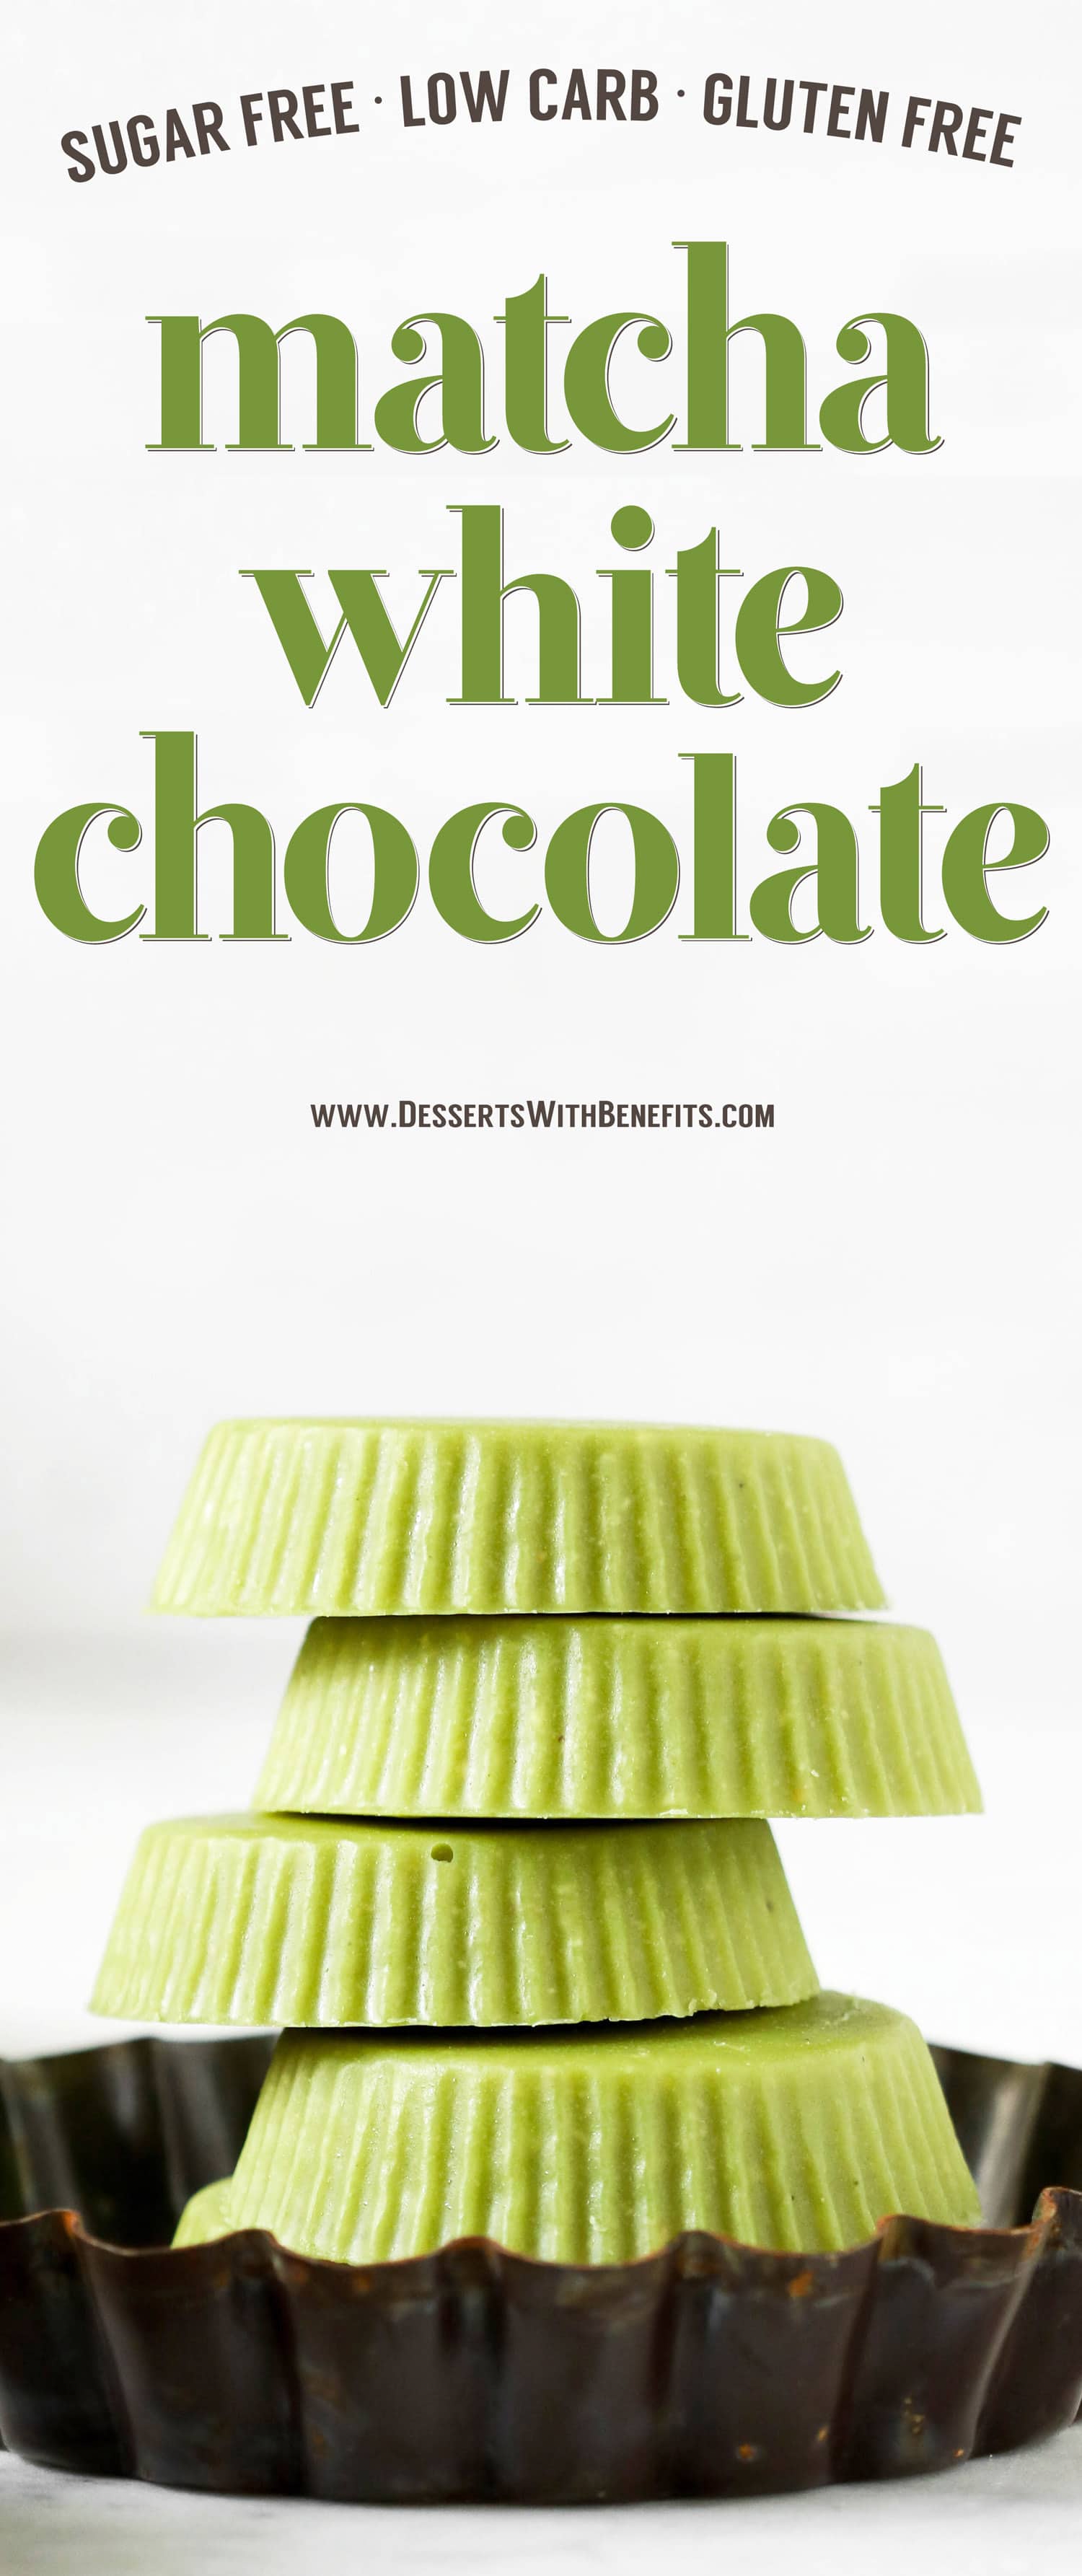 If you like matcha green tea and if you like white chocolate, combine the two and make this Matcha Green Tea White Chocolate! It's earthy from the matcha, yet sweet and delicious from the white chocolate.  This Homemade Matcha White Chocolate is the ultimate treat -- and it's secretly sugar free, low carb, and gluten free too!